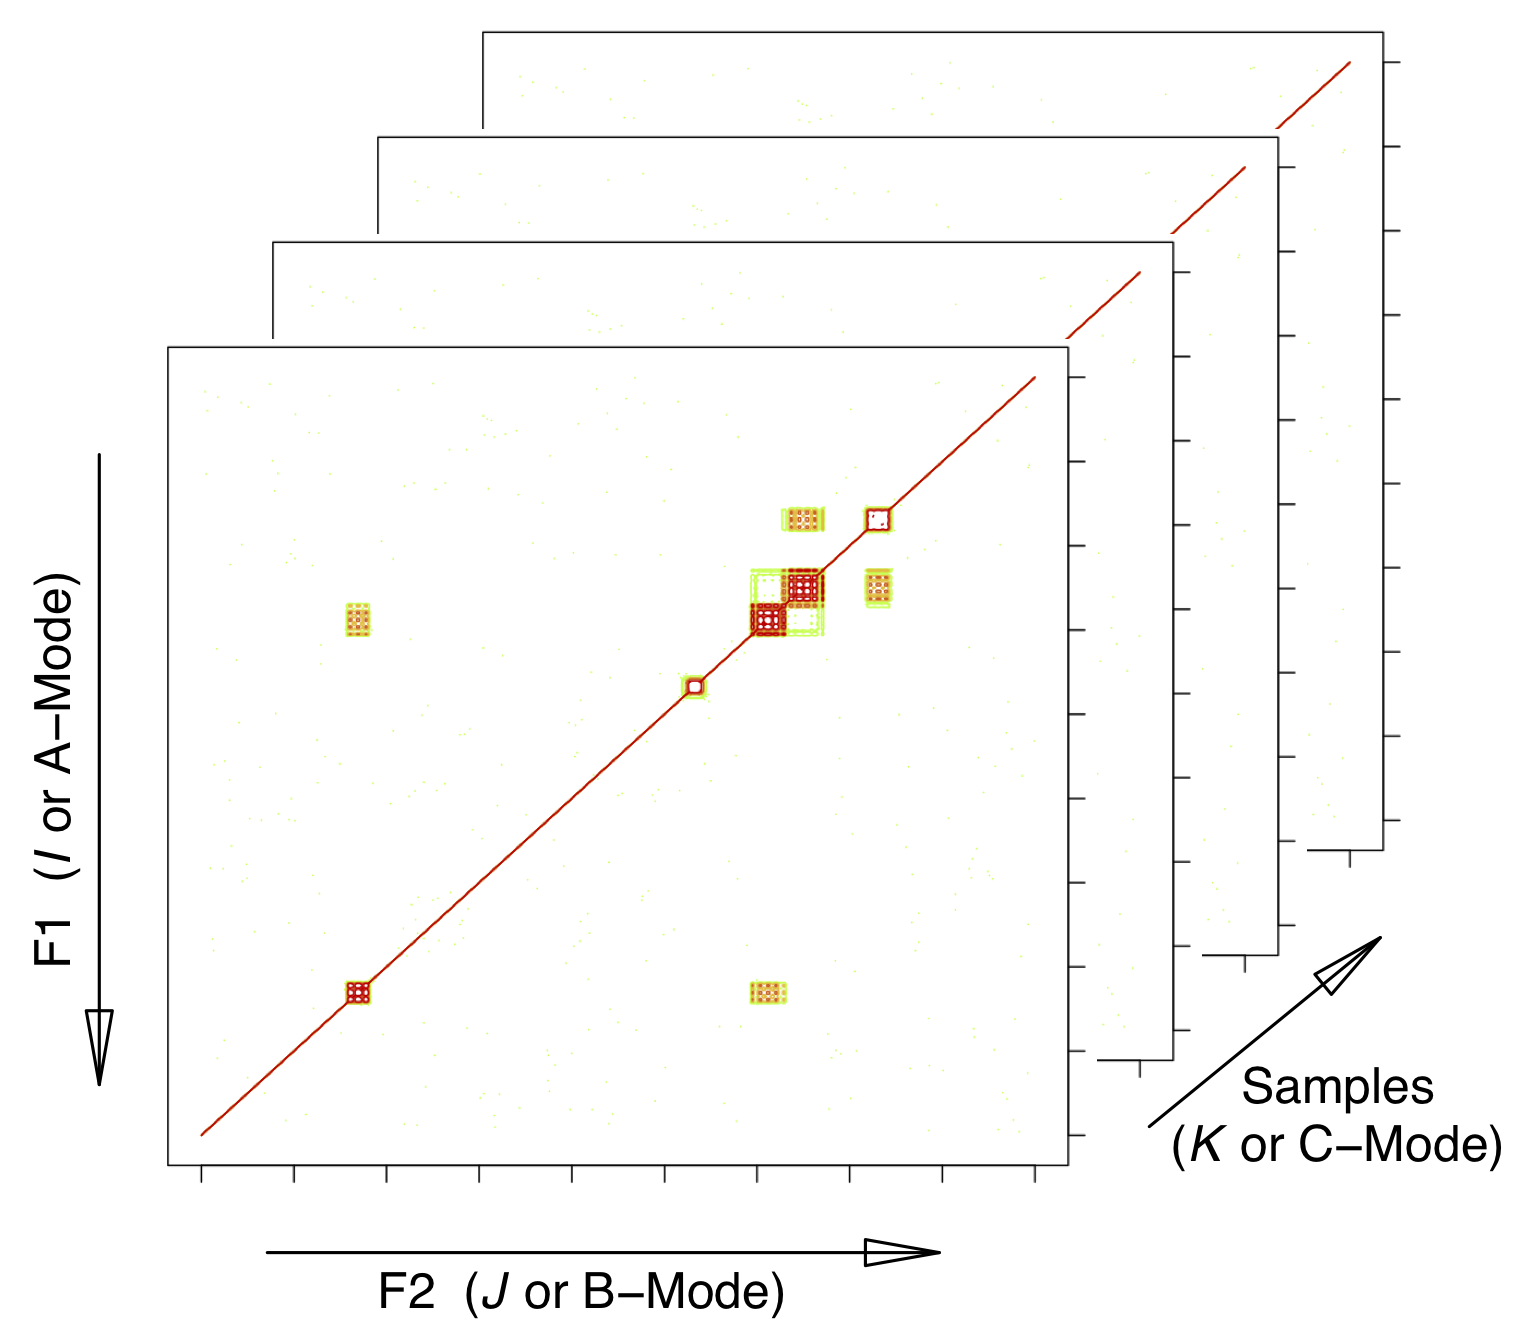 Configuration of the data array. $I$, $J$ and $K$ are array indices; F2 and F1 are standard terms for NMR dimensions. The mode terminology is typically used in the PARAFAC literature.  This structure is also sometimes referred to as a data cube.